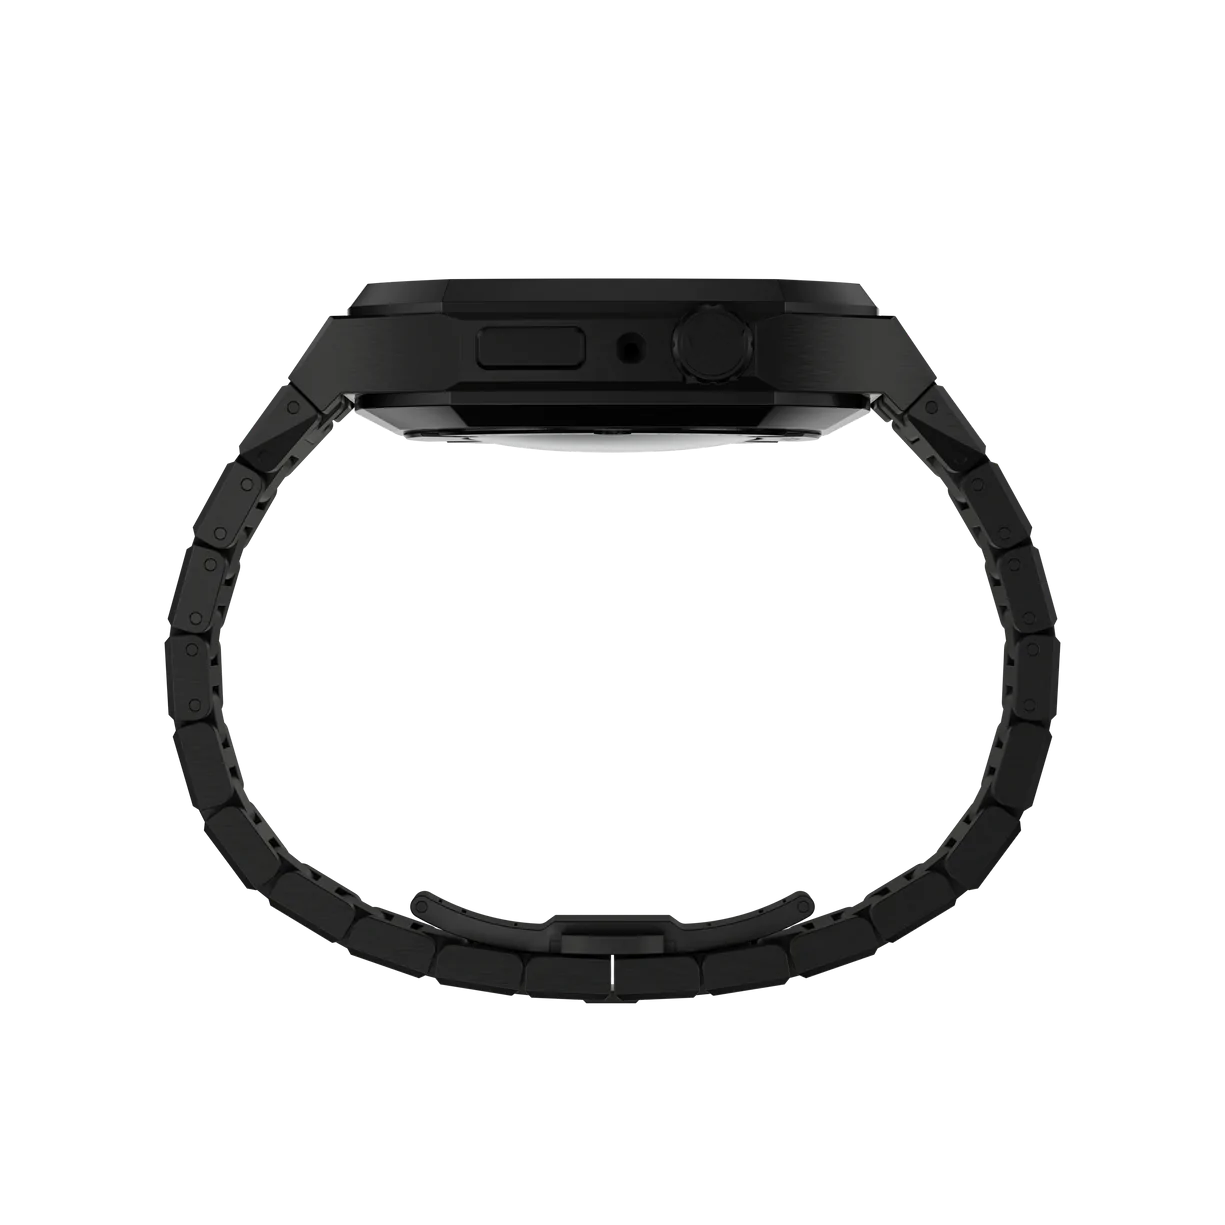 Royal ™ Metal series - Strap + protector for Apple Watch 